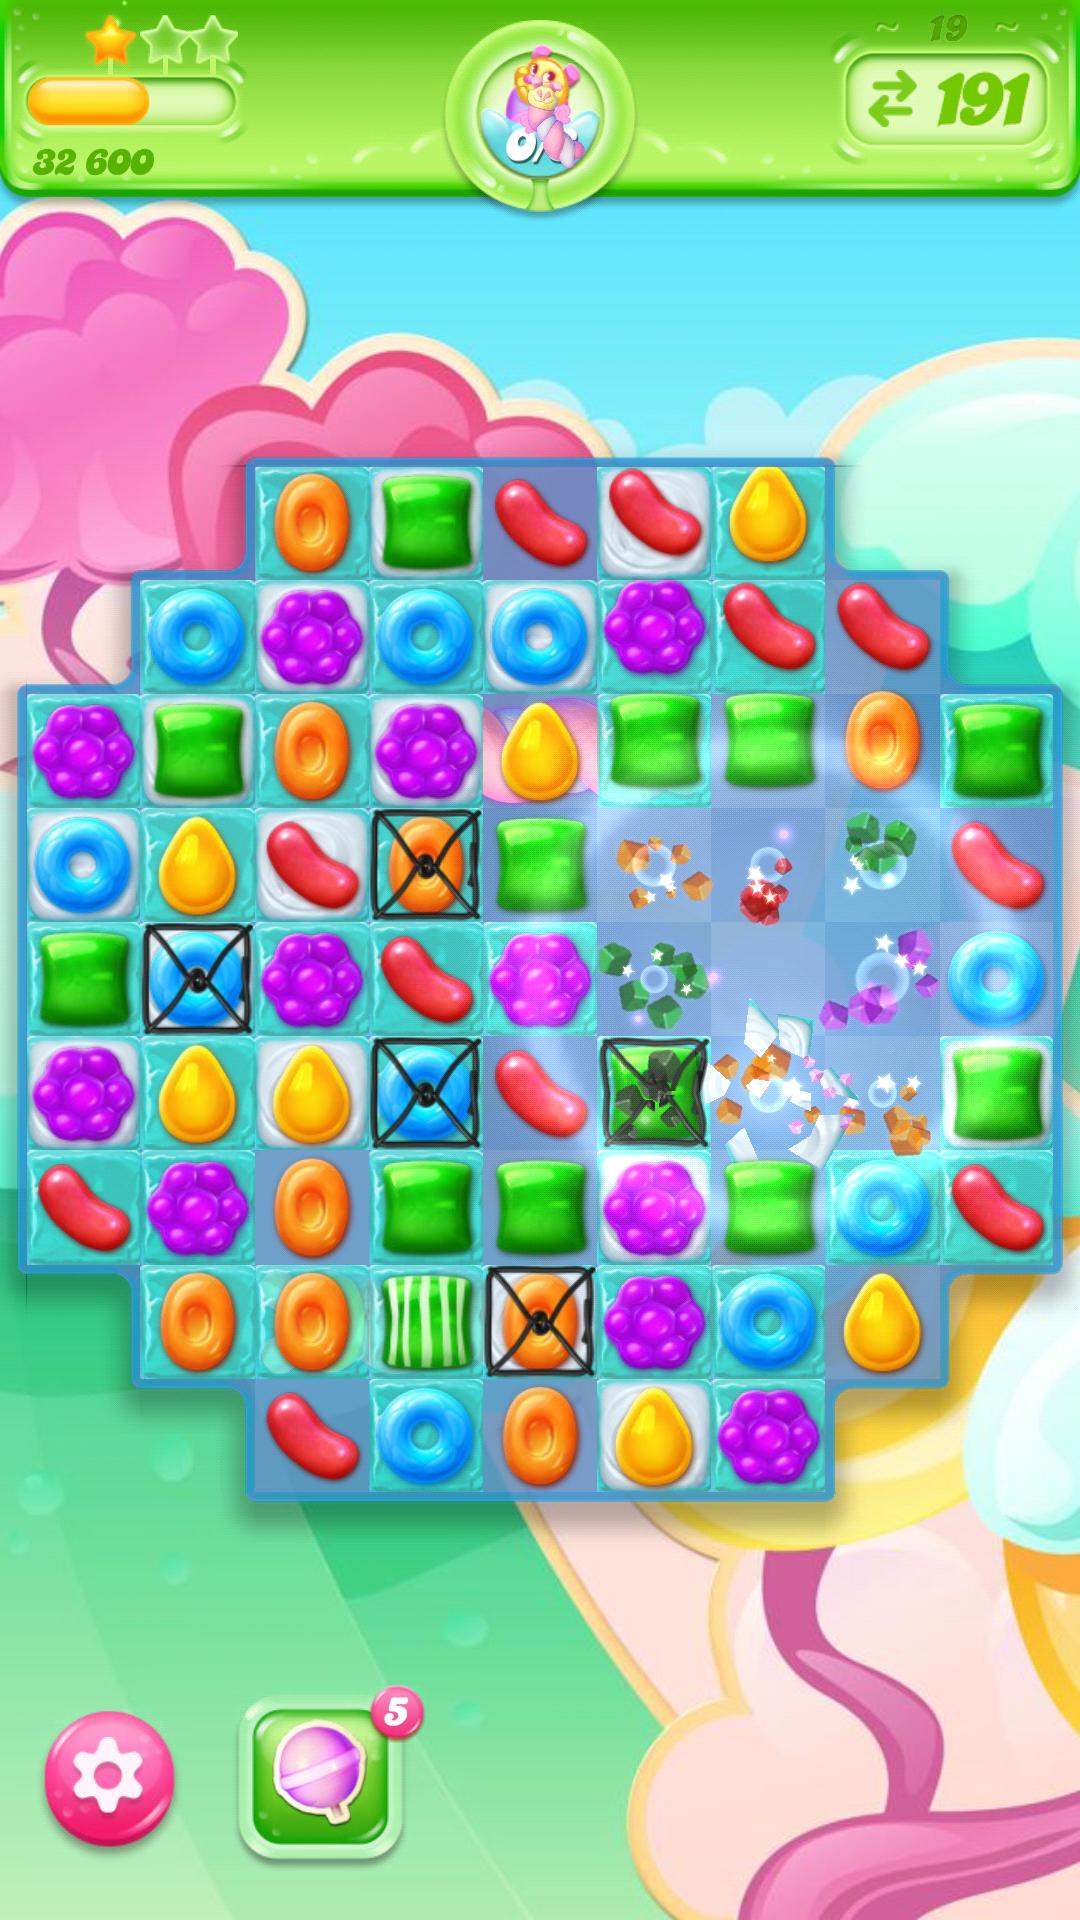 You can see part of a Puffler under the yellow candy in the middle of the third row.